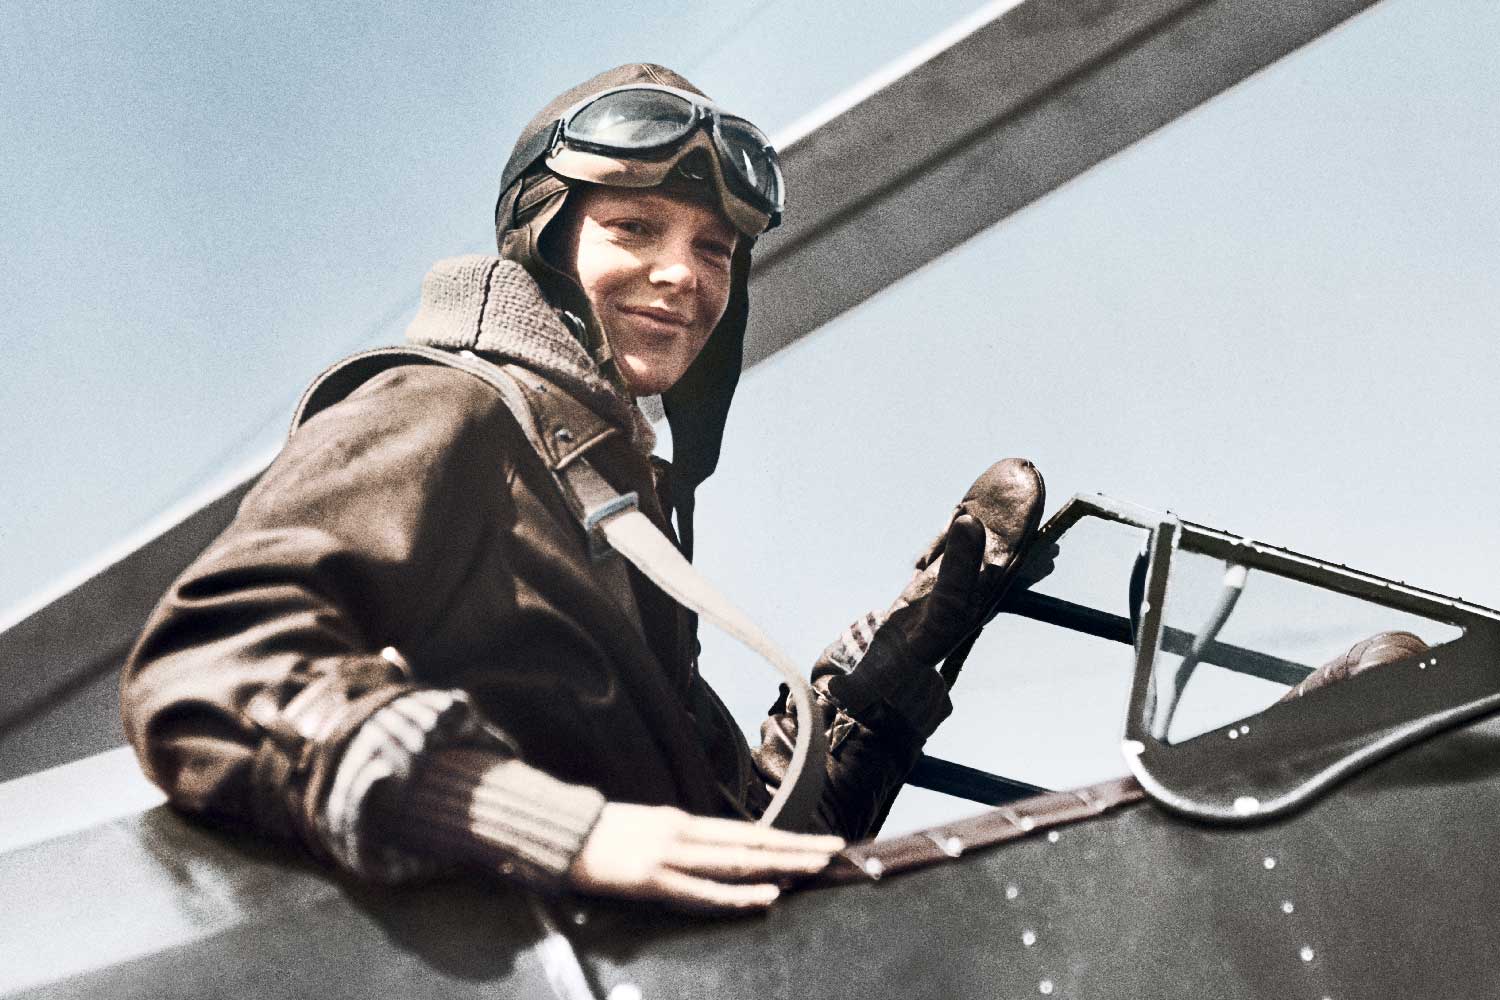 Amelia Earhart timed her 14 hours 56-minute solo trans-Atlantic flight with her Longines chronograph.